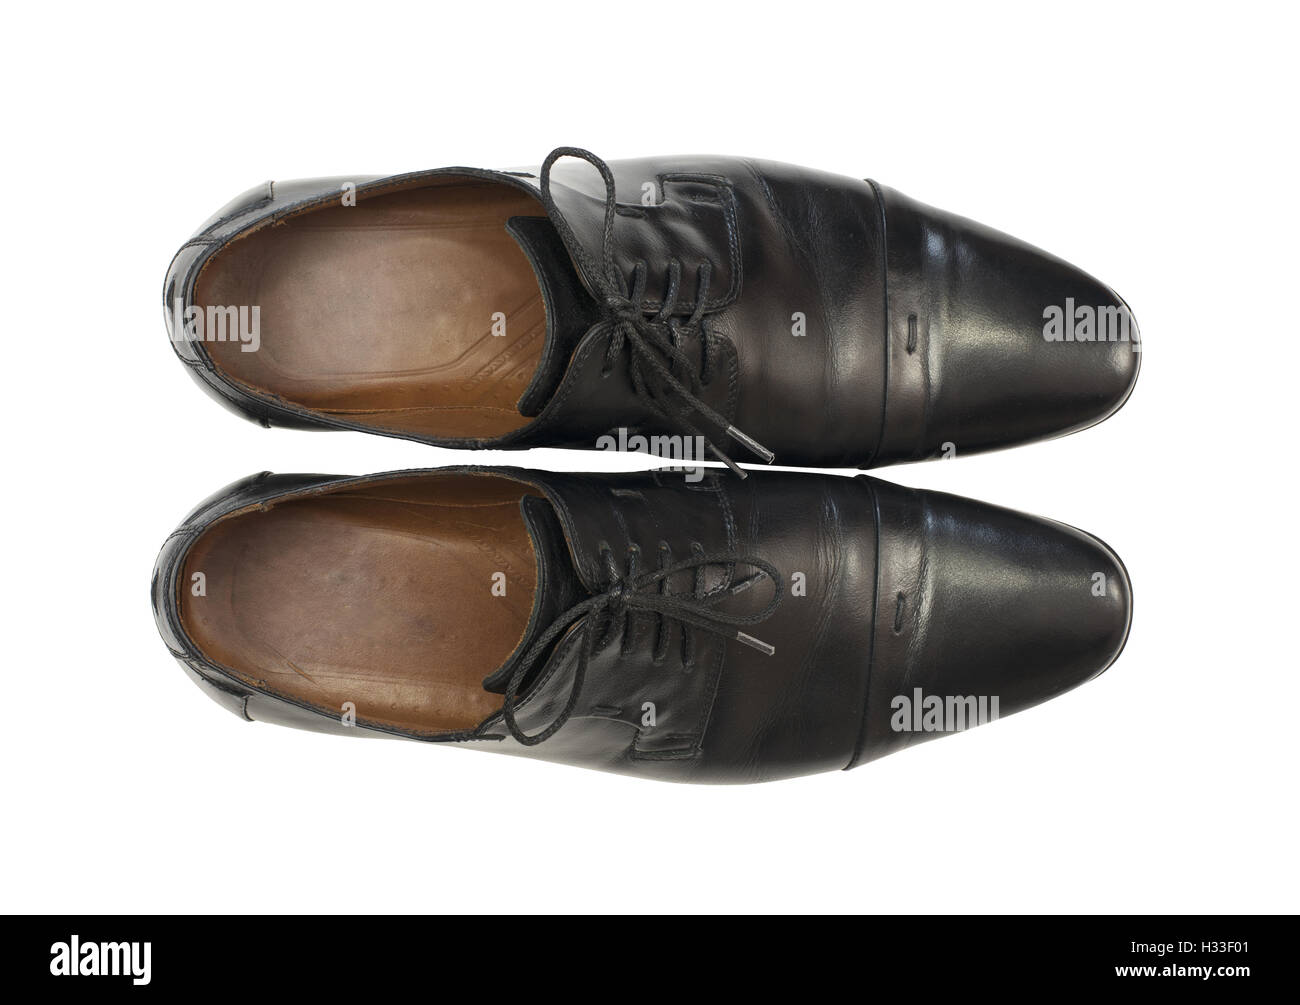 Pair of men's shoes in classic style Stock Photo - Alamy